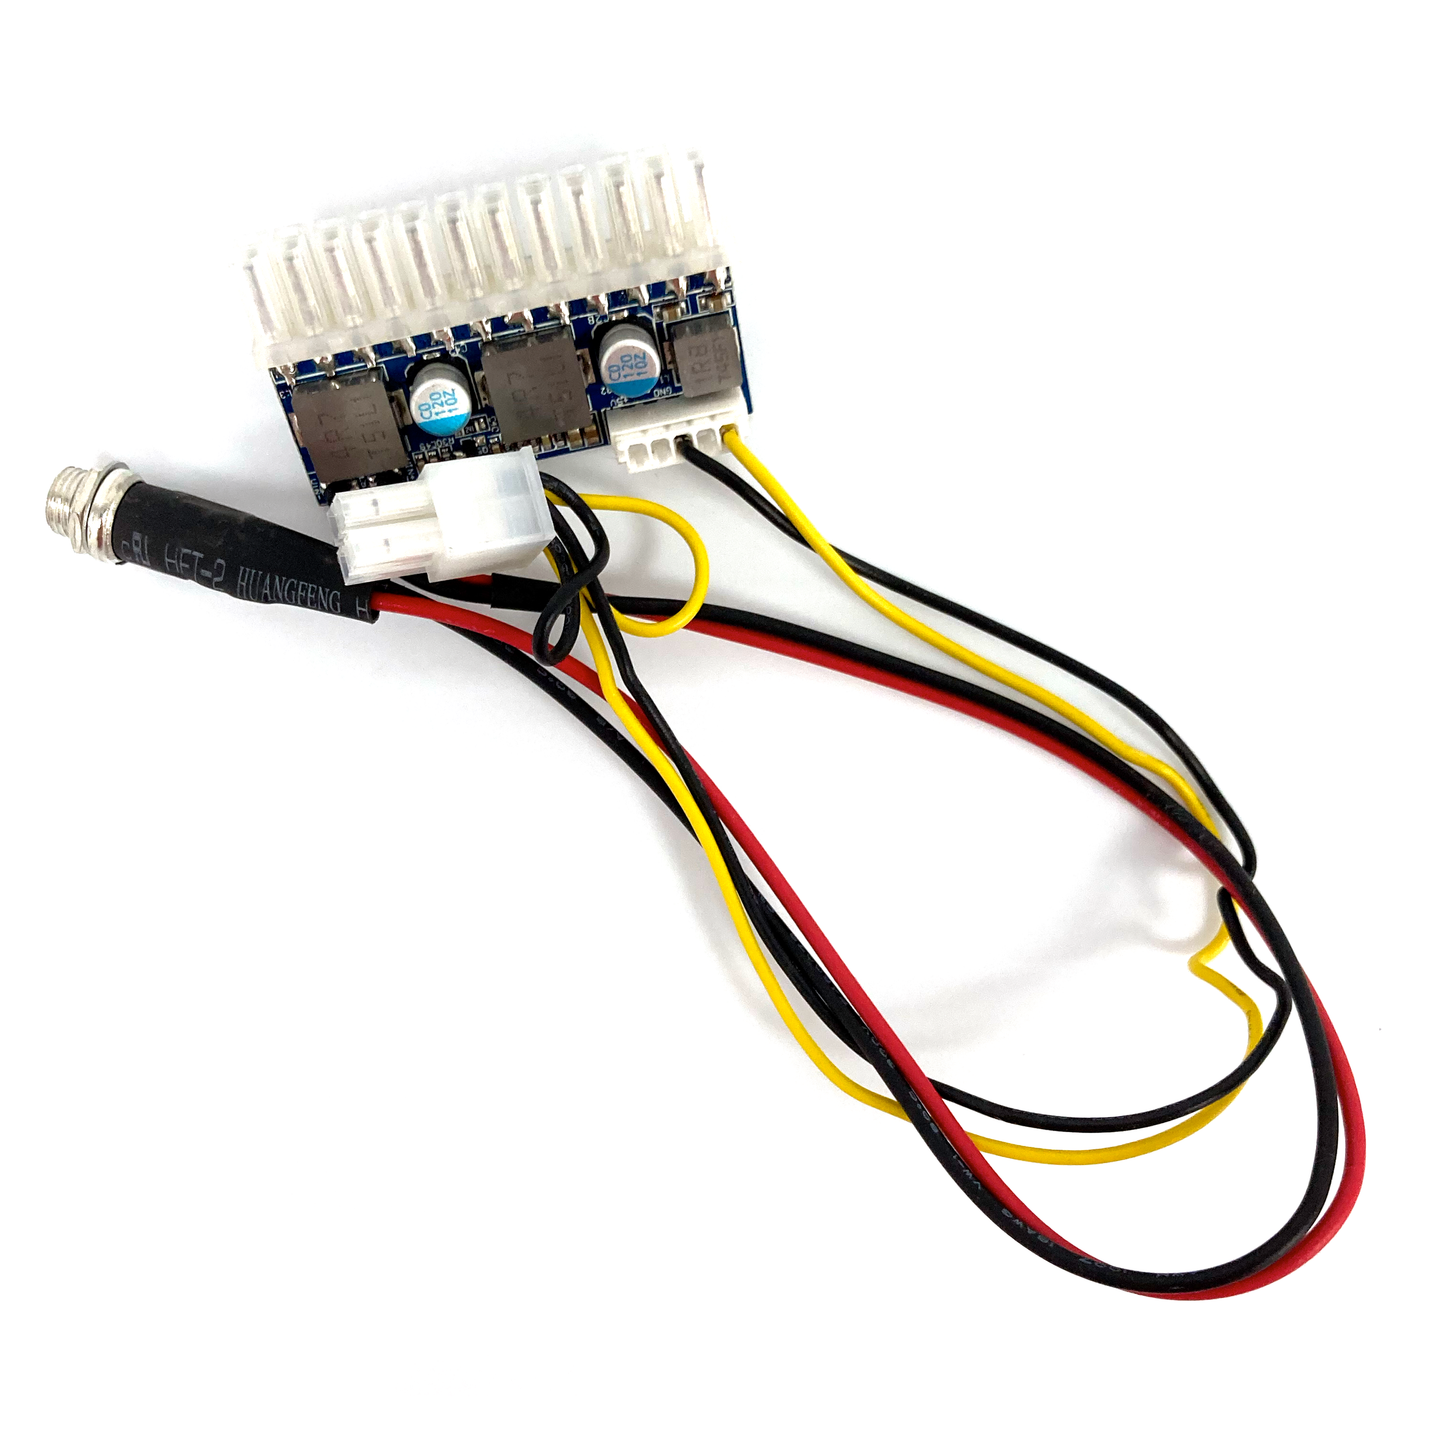 The Pico Board is an adapter that allows you to use a normal 24-pin Motherboard with power from a 12v Power Brick. The Pico Board has been used on all motherboards until the 2021 64-bit Motherboards. Sold by Miele Manufacturing.